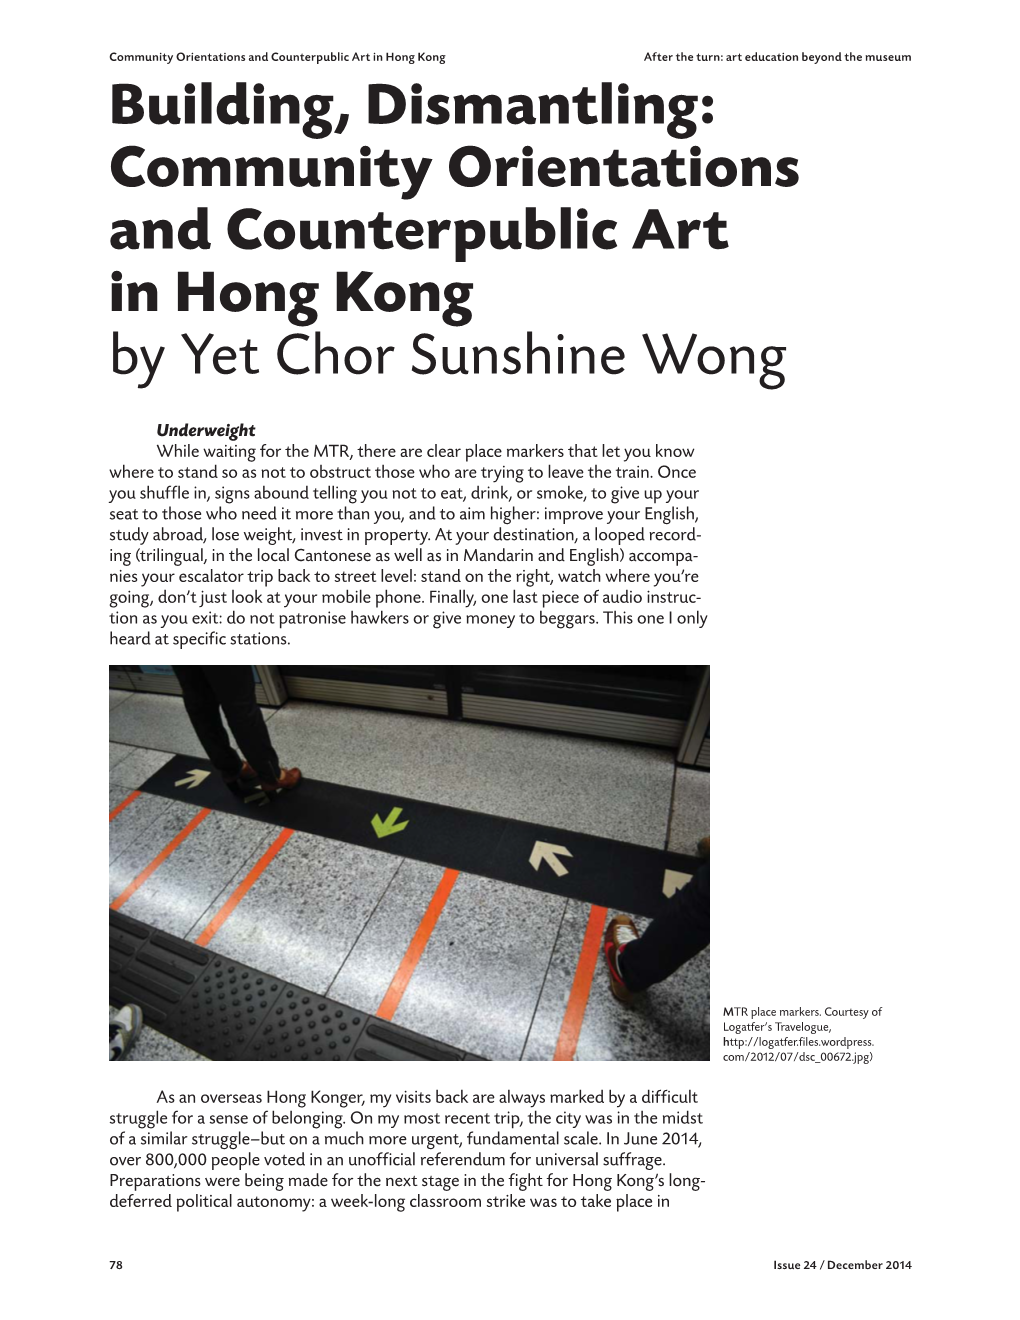 Building, Dismantling: Community Orientations and Counterpublic Art in Hong Kong by Yet Chor Sunshine Wong